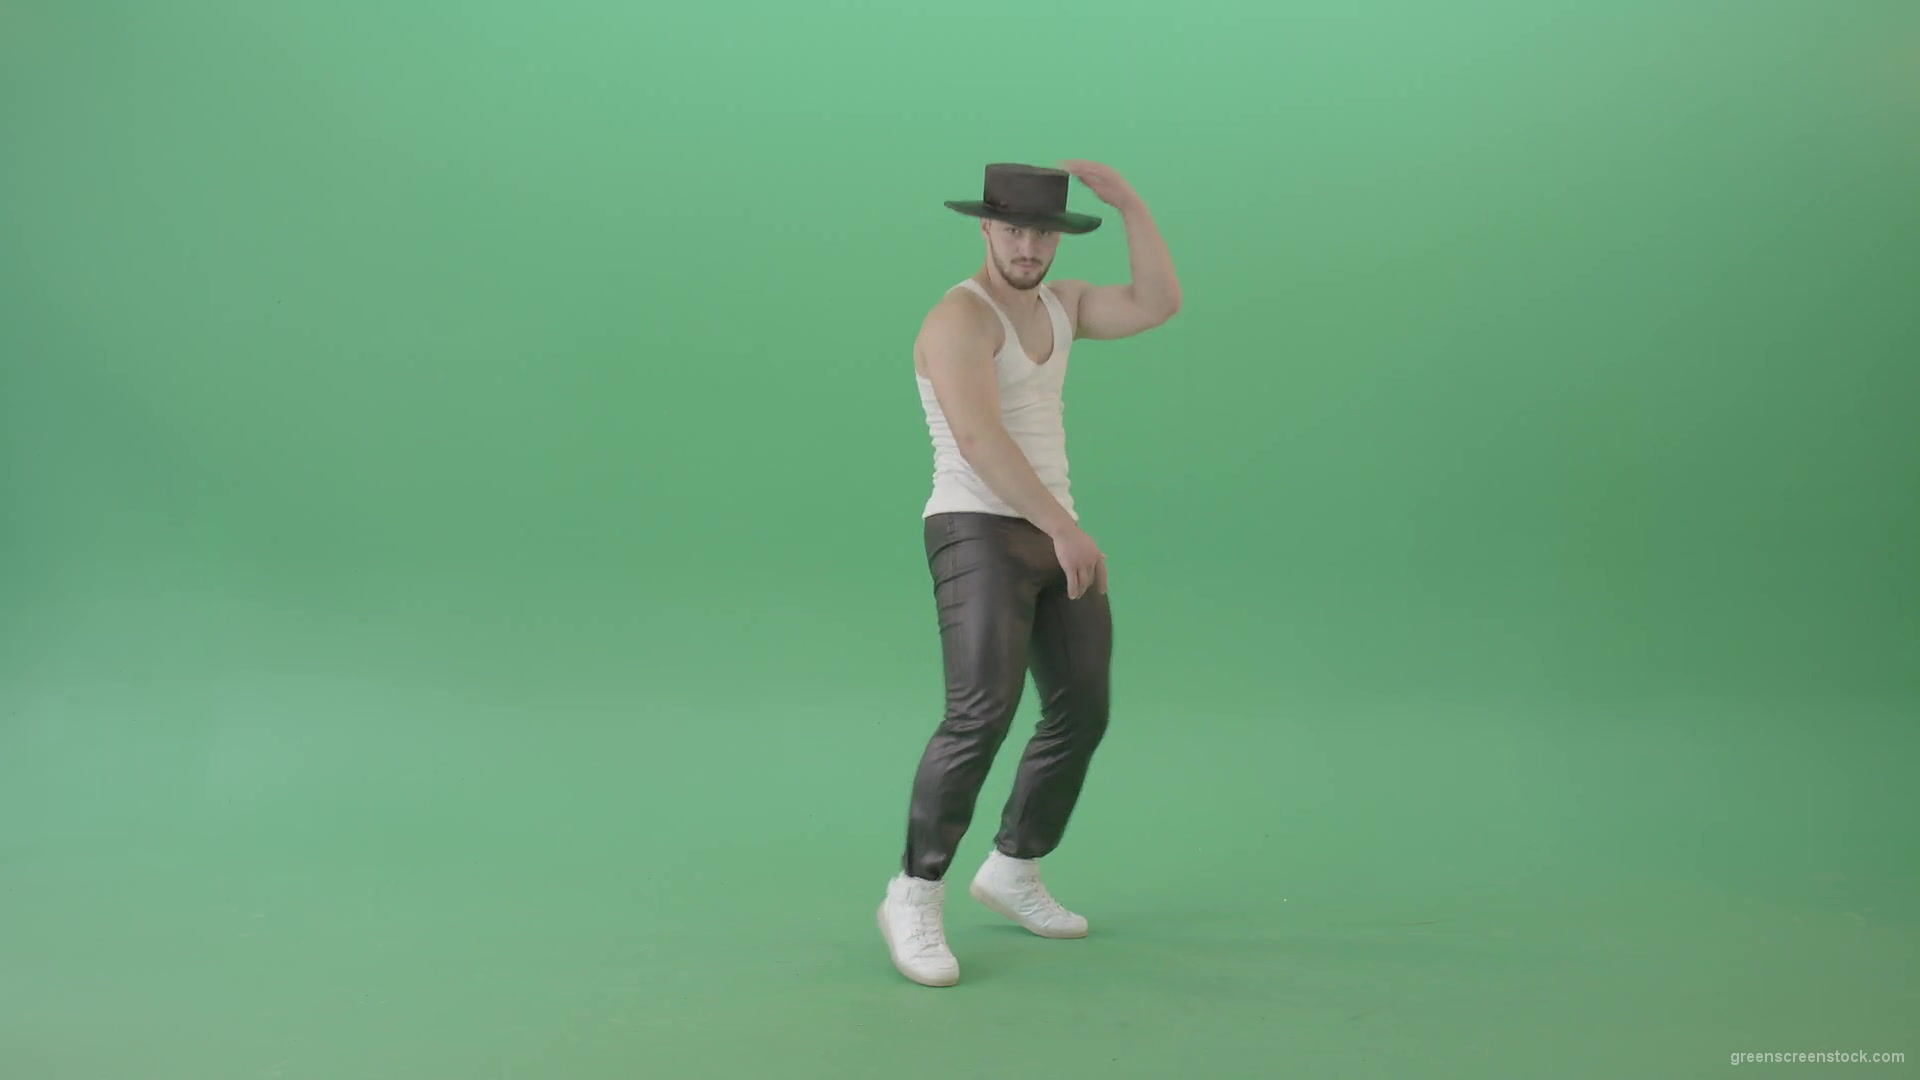 Michael-Jackson-Turn-spinning-and-dance-by-funny-man-isolated-on-Green-Screen-4K-Video-Footage-1920_007 Green Screen Stock